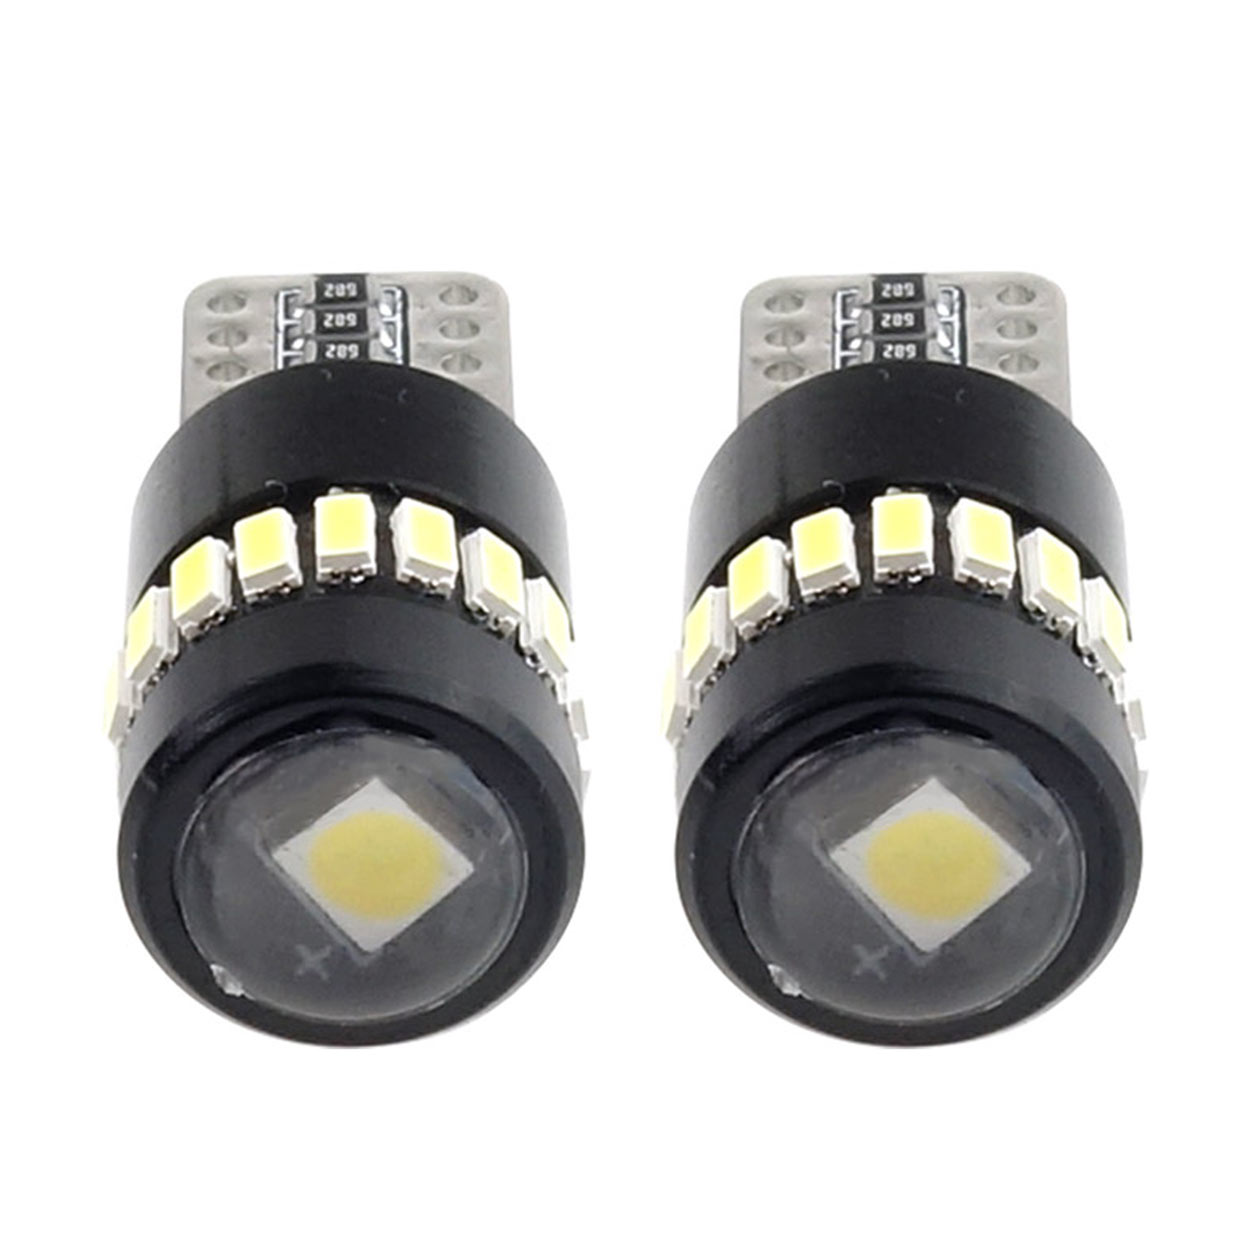 Bec Led 18SMD 3014 plus 1SMD 12/24V Pozitie, W5W, T10 Canbus 2buc - Alb thumb